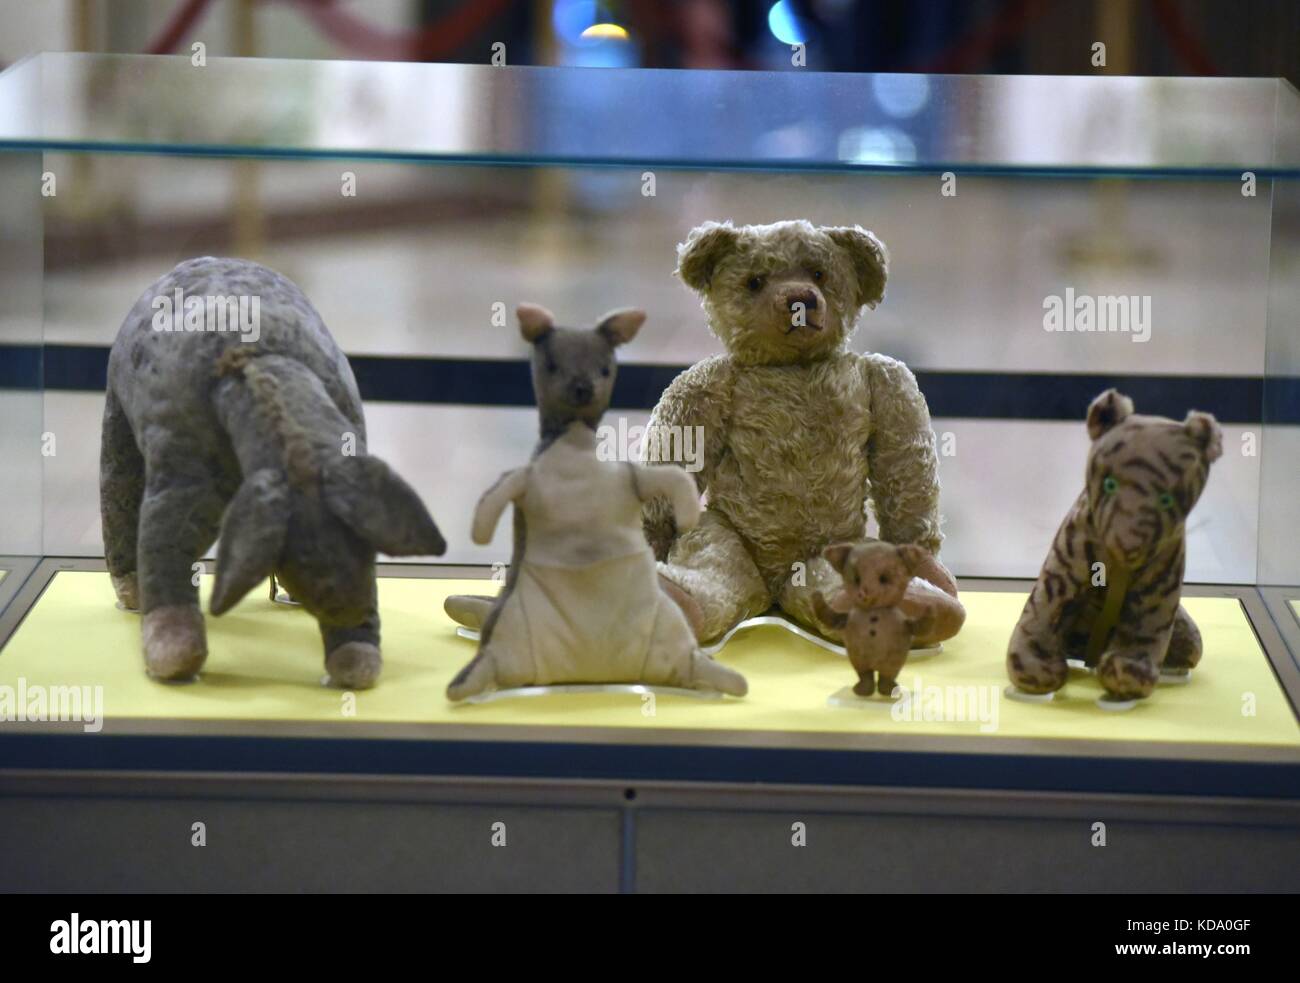 New York, NY, USA. 11th Oct, 2017. Winnie-the-Pooh original dolls, Eeyore, Kanga, Winnie the Pooh, Piglet, Tigger at arrivals for GOODBYE CHRISTOPHER ROBIN Premiere, Astor Hall at The New York Public Library, New York, NY October 11, 2017. Credit: Derek Storm/Everett Collection/Alamy Live News Stock Photo